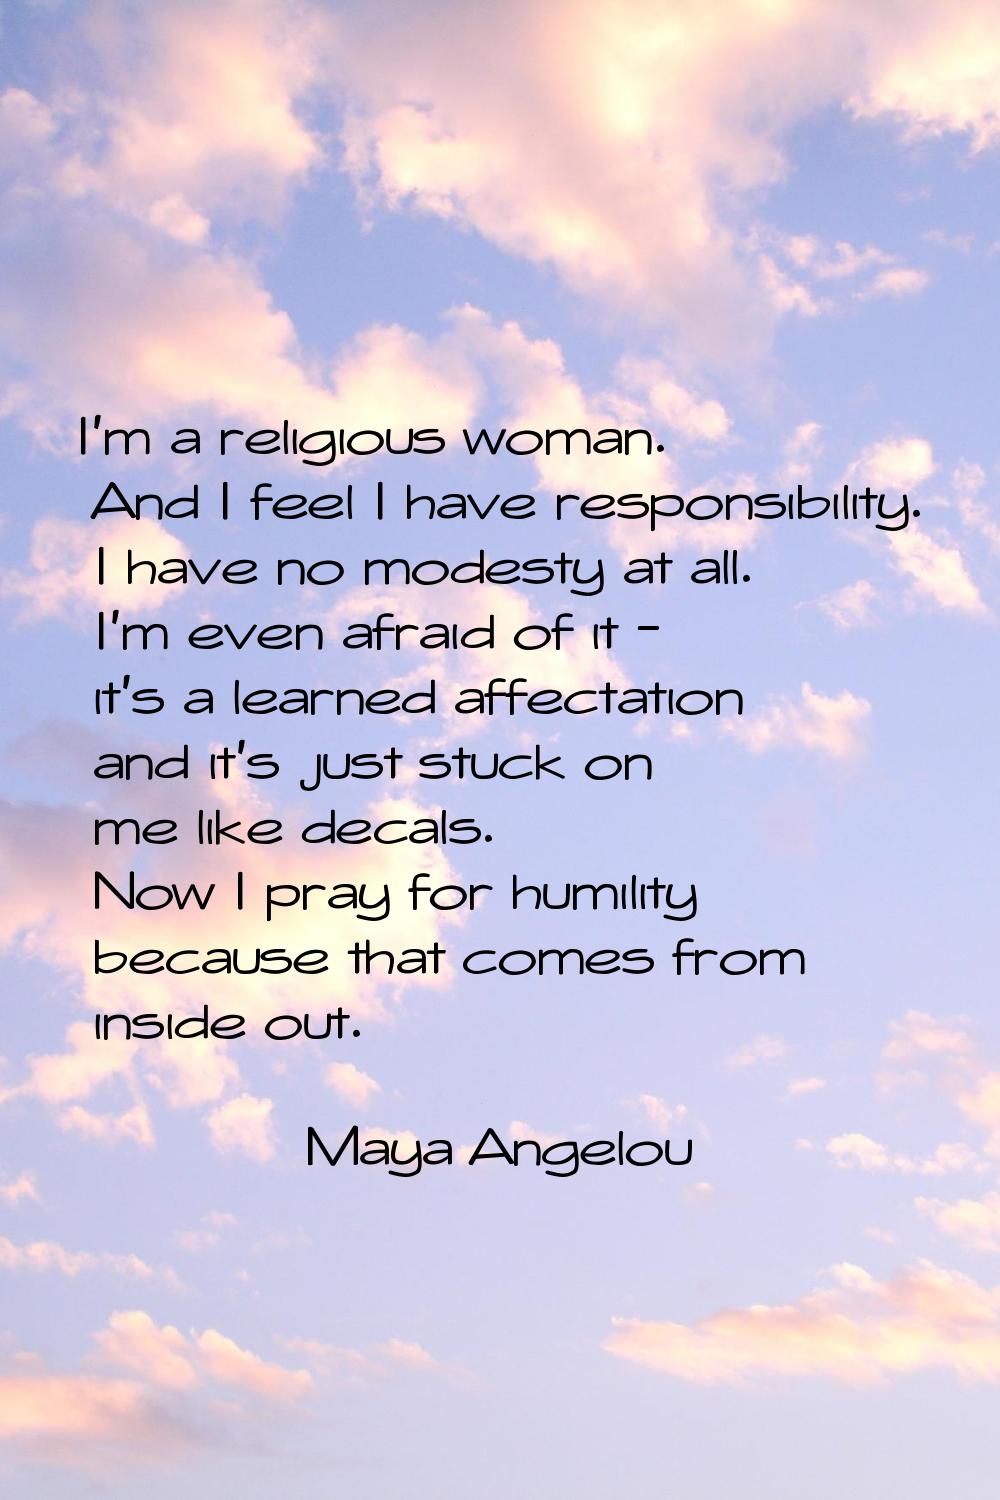 I'm a religious woman. And I feel I have responsibility. I have no modesty at all. I'm even afraid 